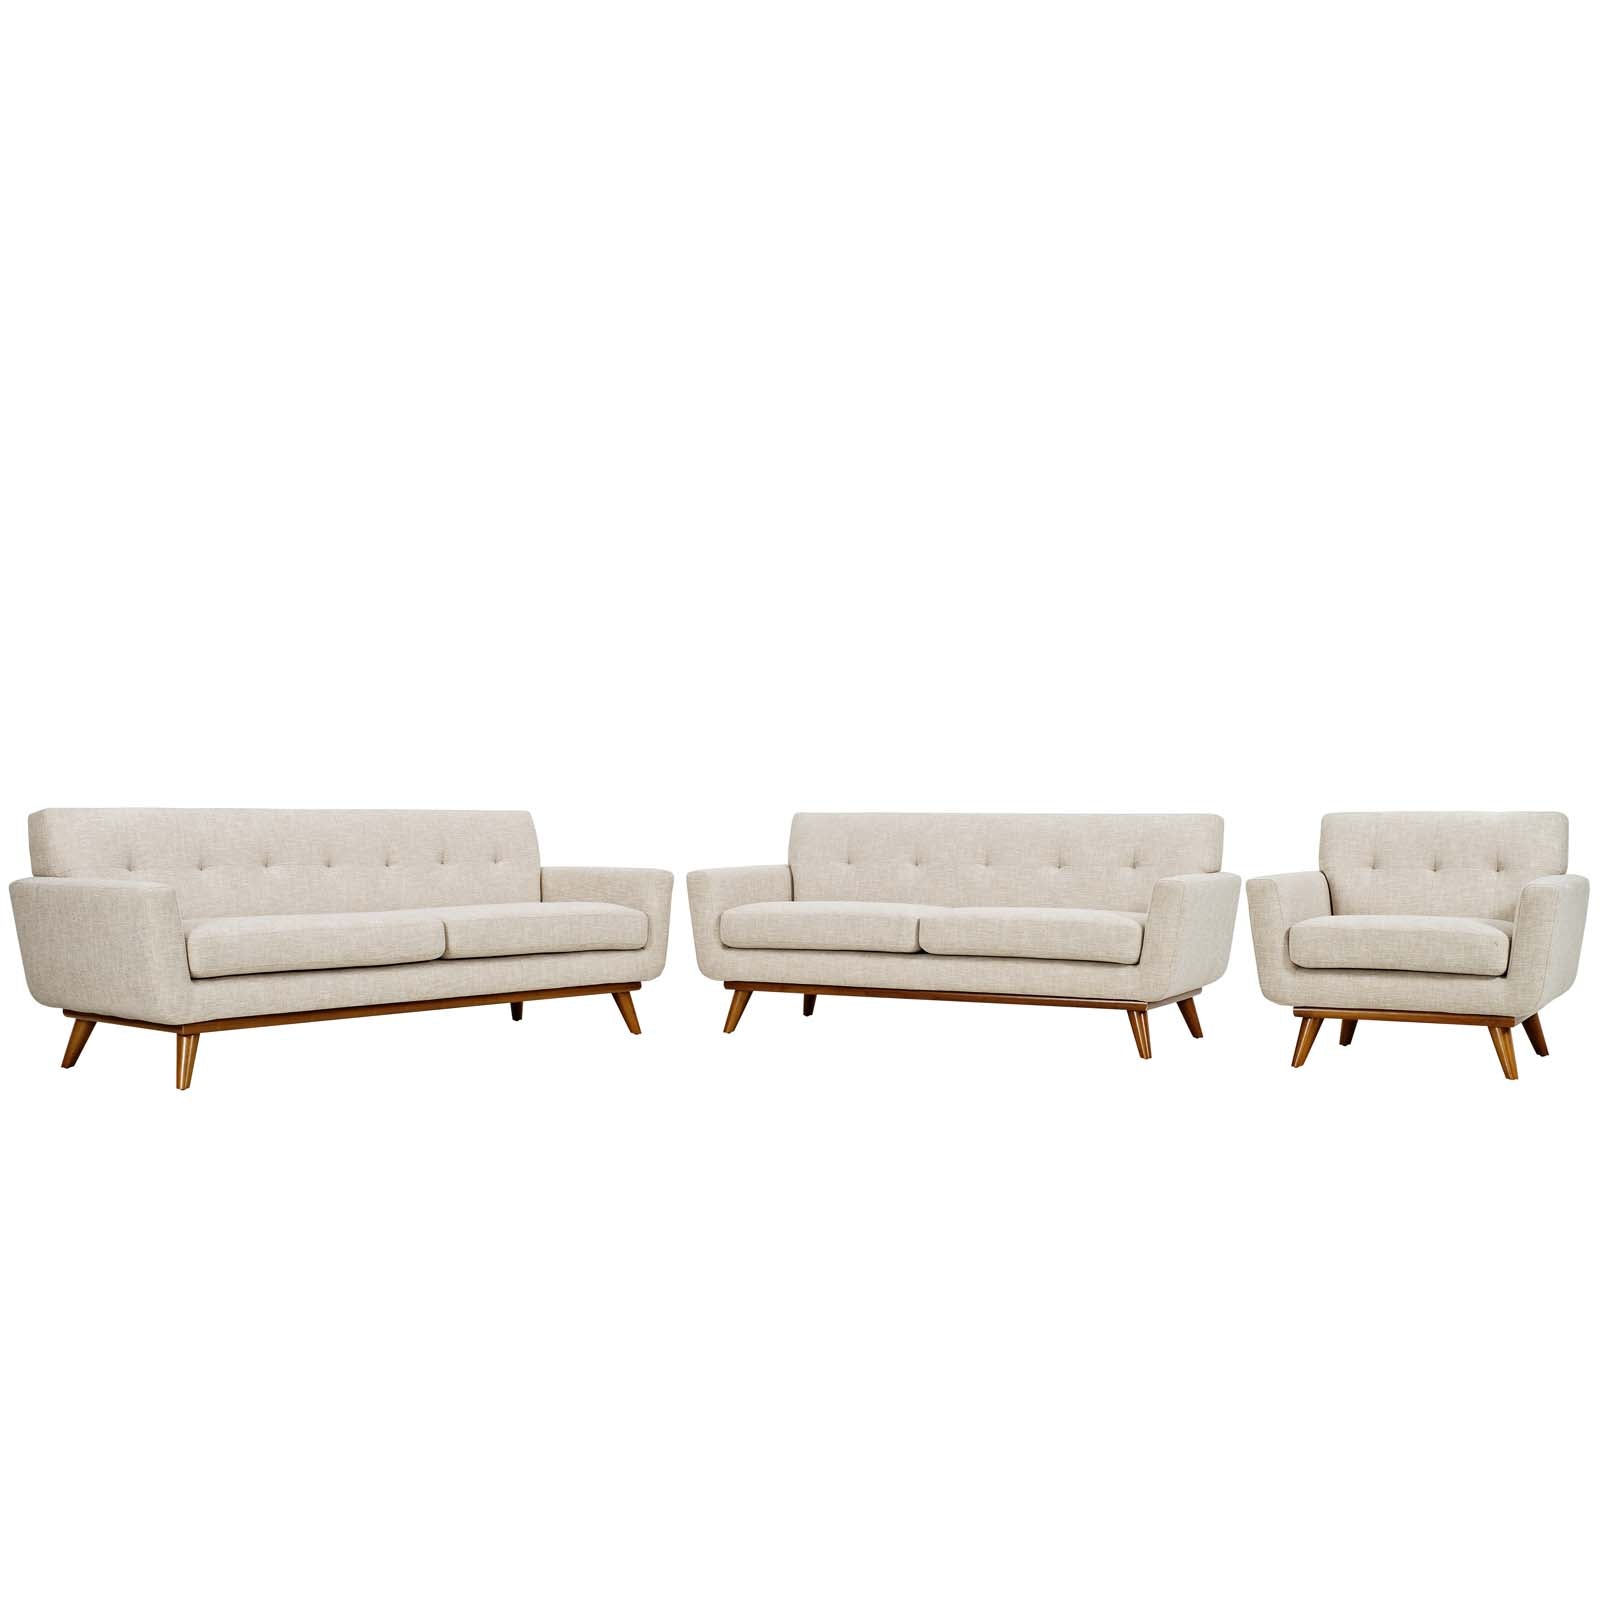 Modway Living Room Sets - Engage Sofa Loveseat and Armchair Beige ( Set of 3 )